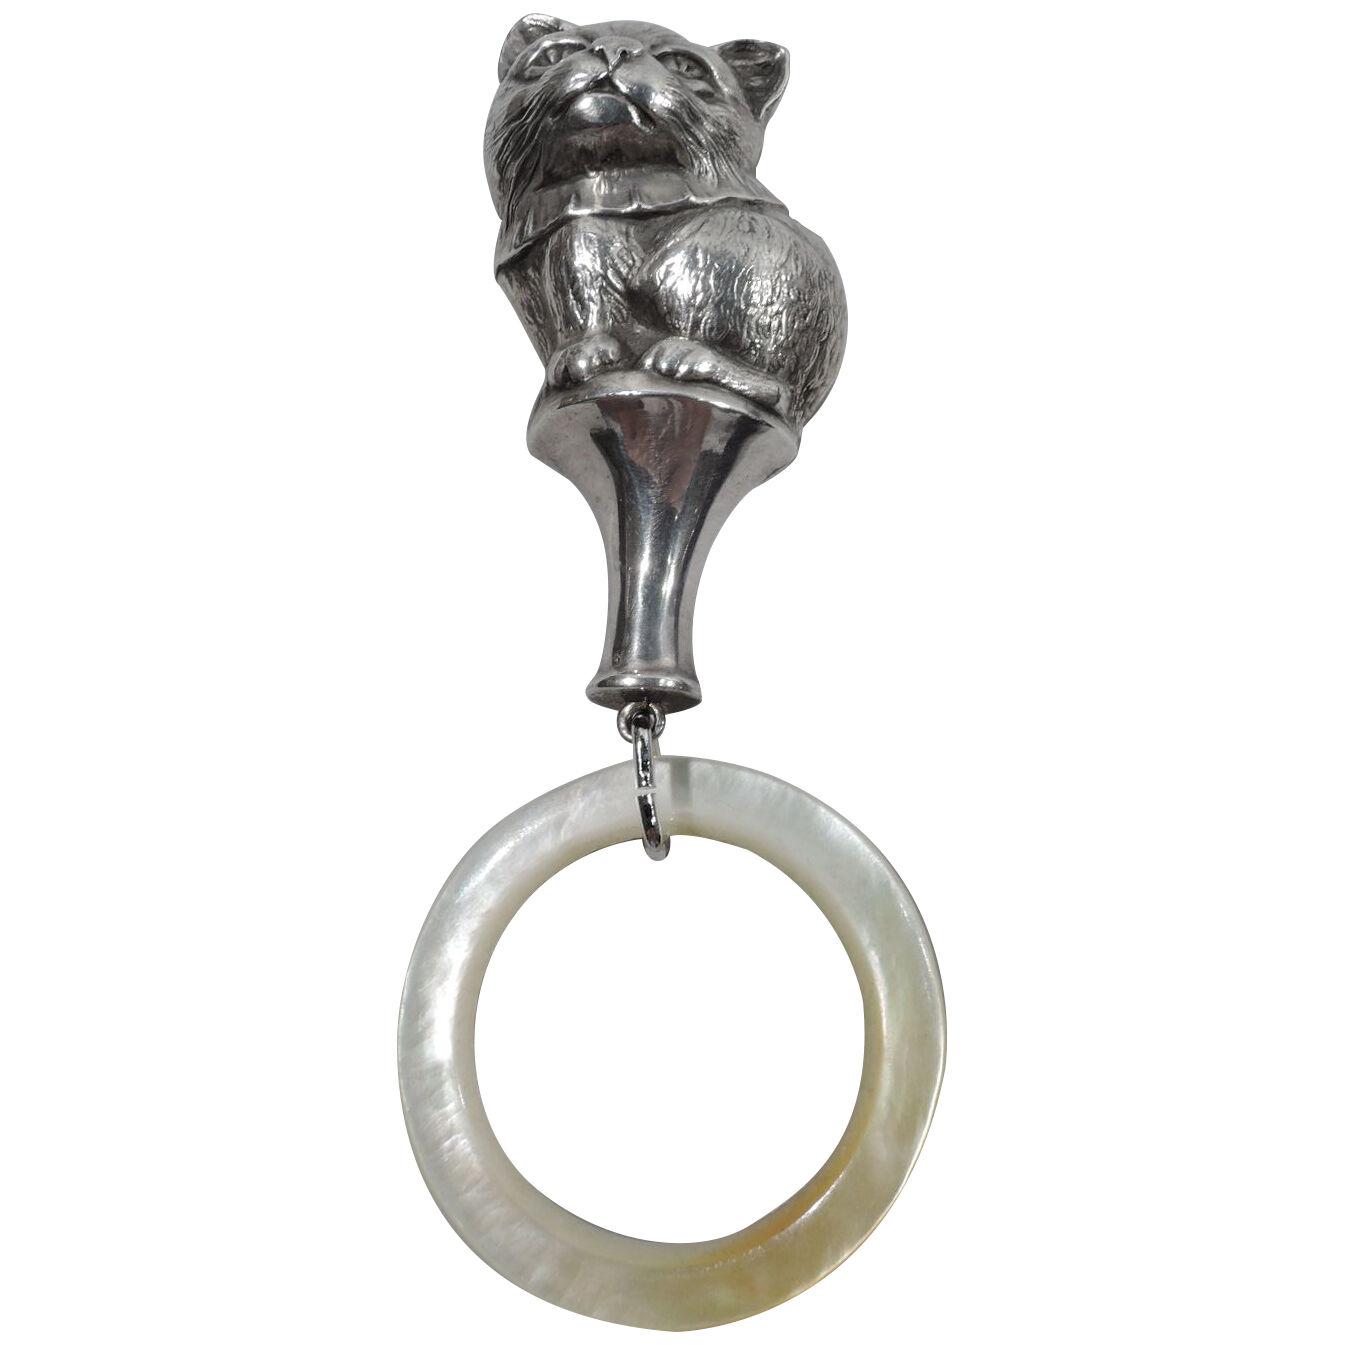 Antique American Sterling Silver Rattle with Kitty Sitting Pretty